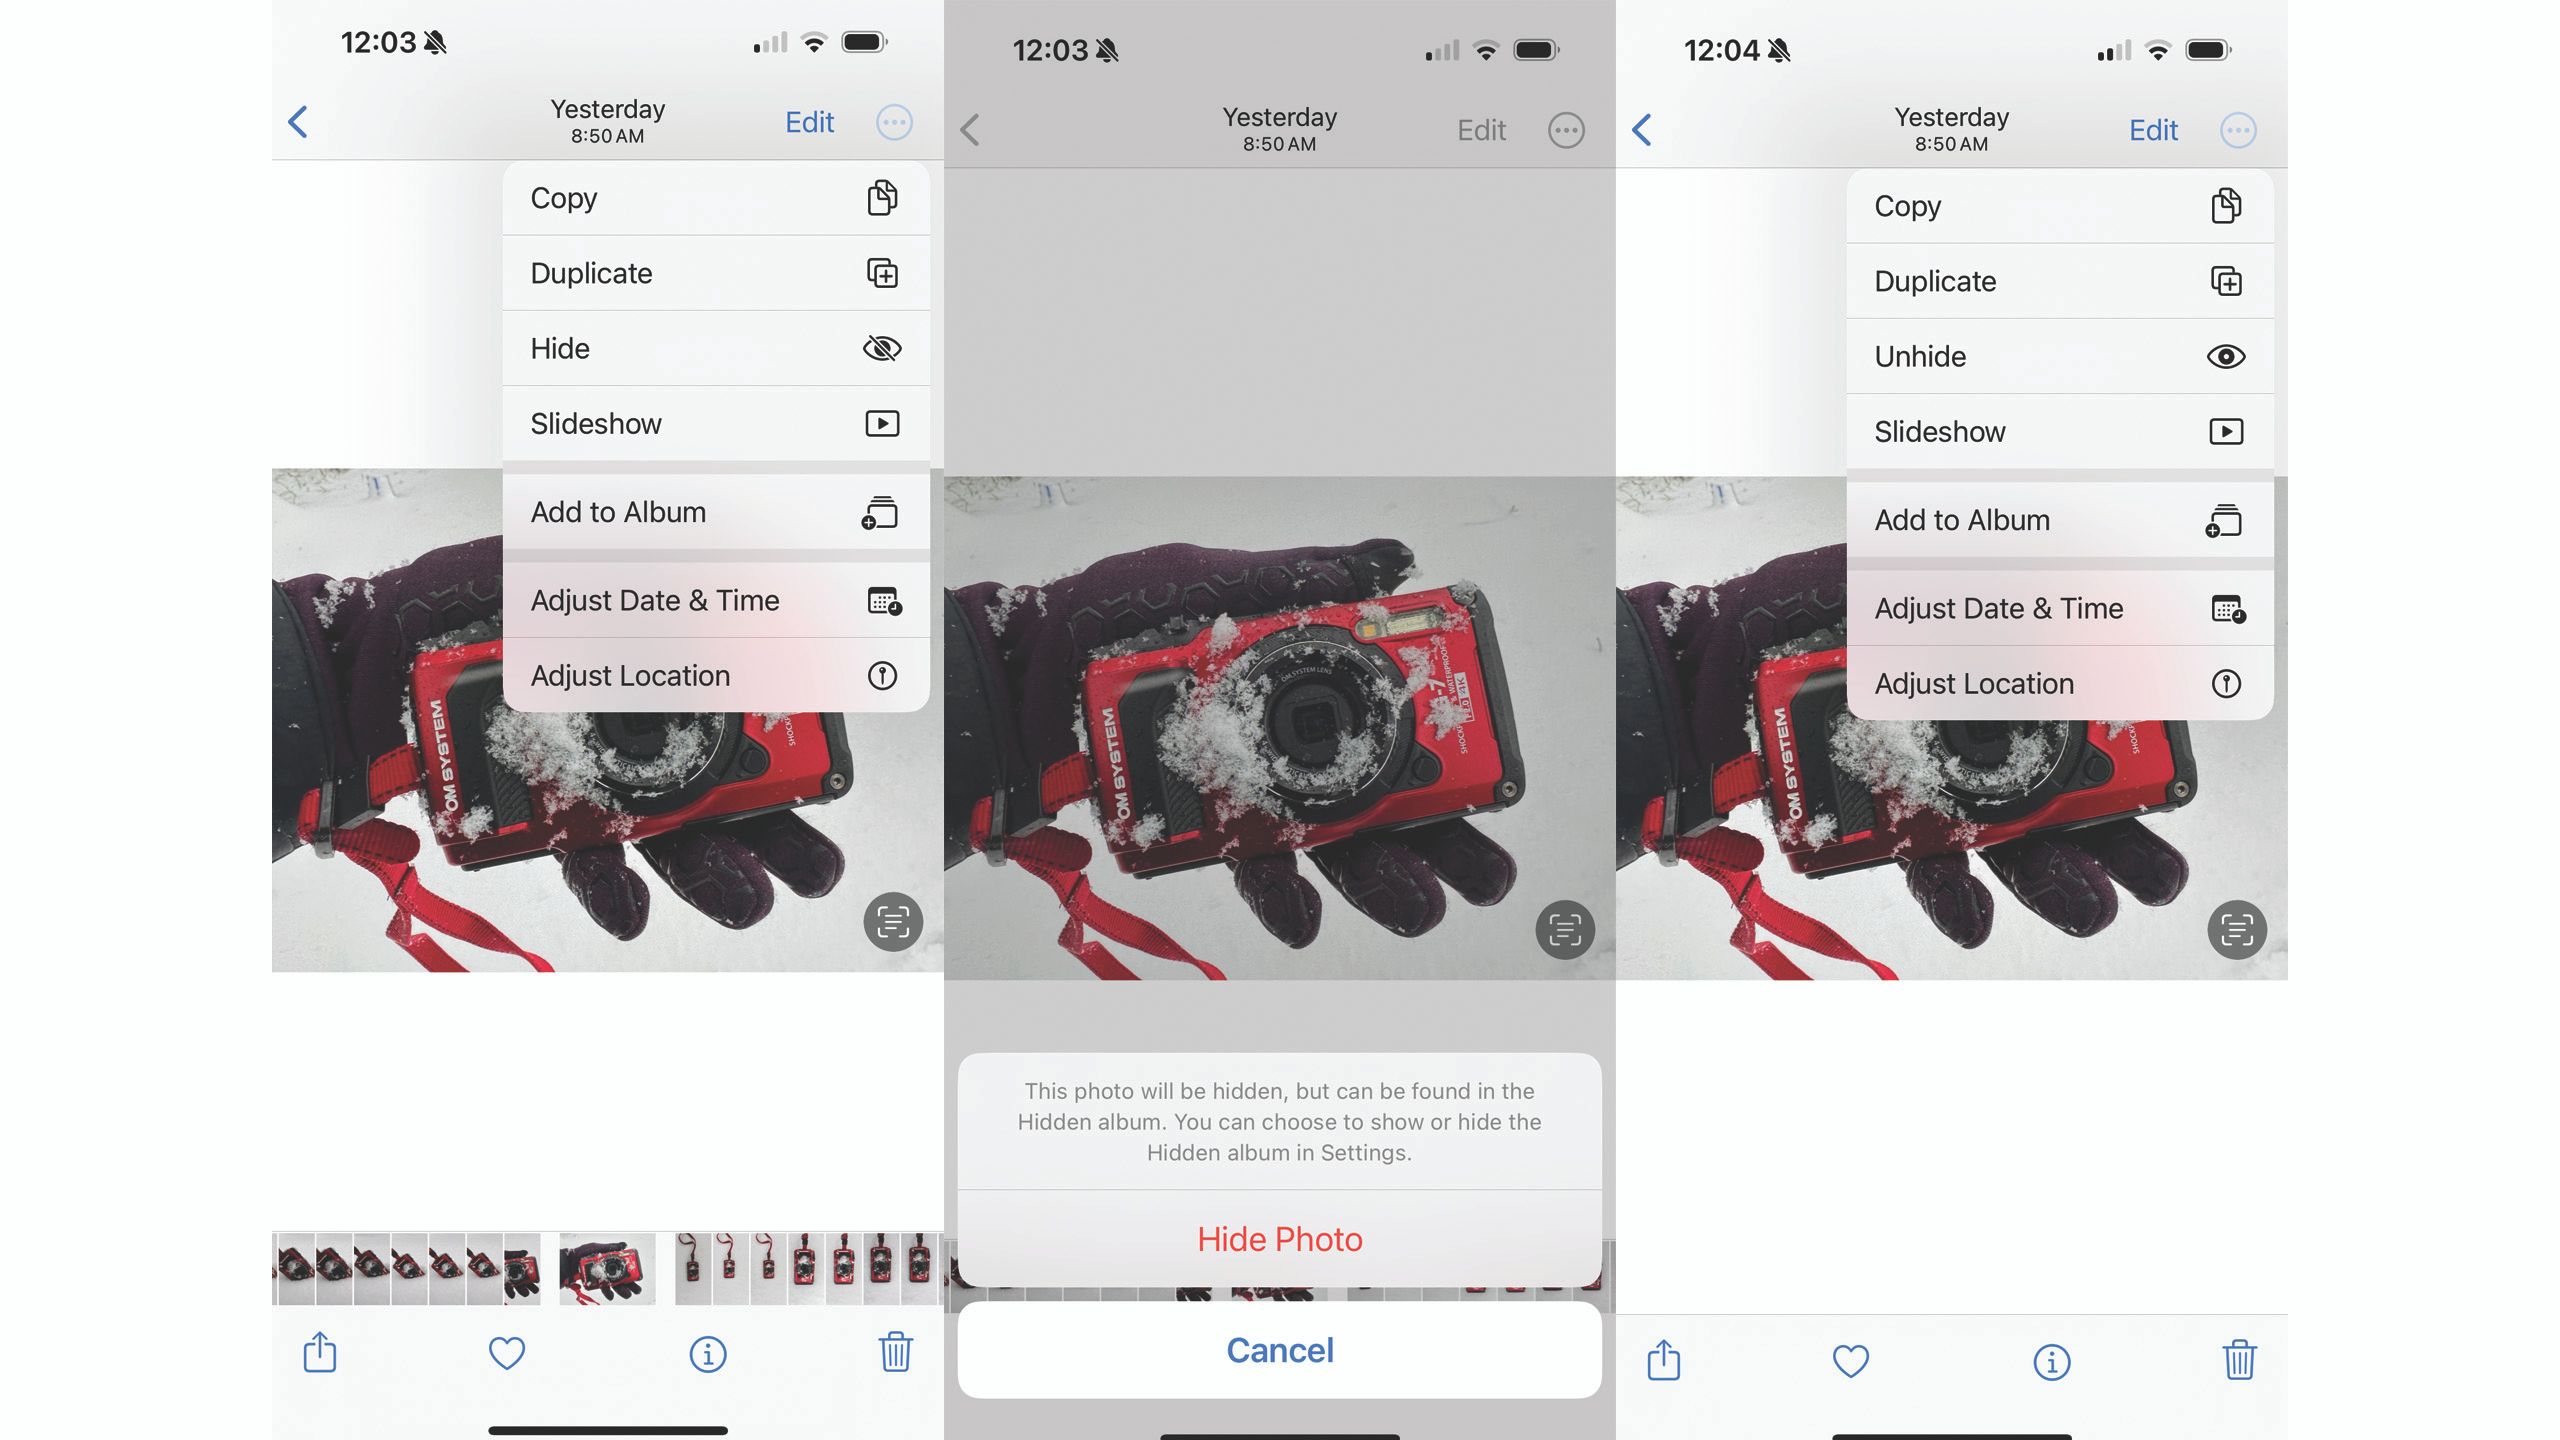 Screenshots of the process to hide a photo on an iPhone